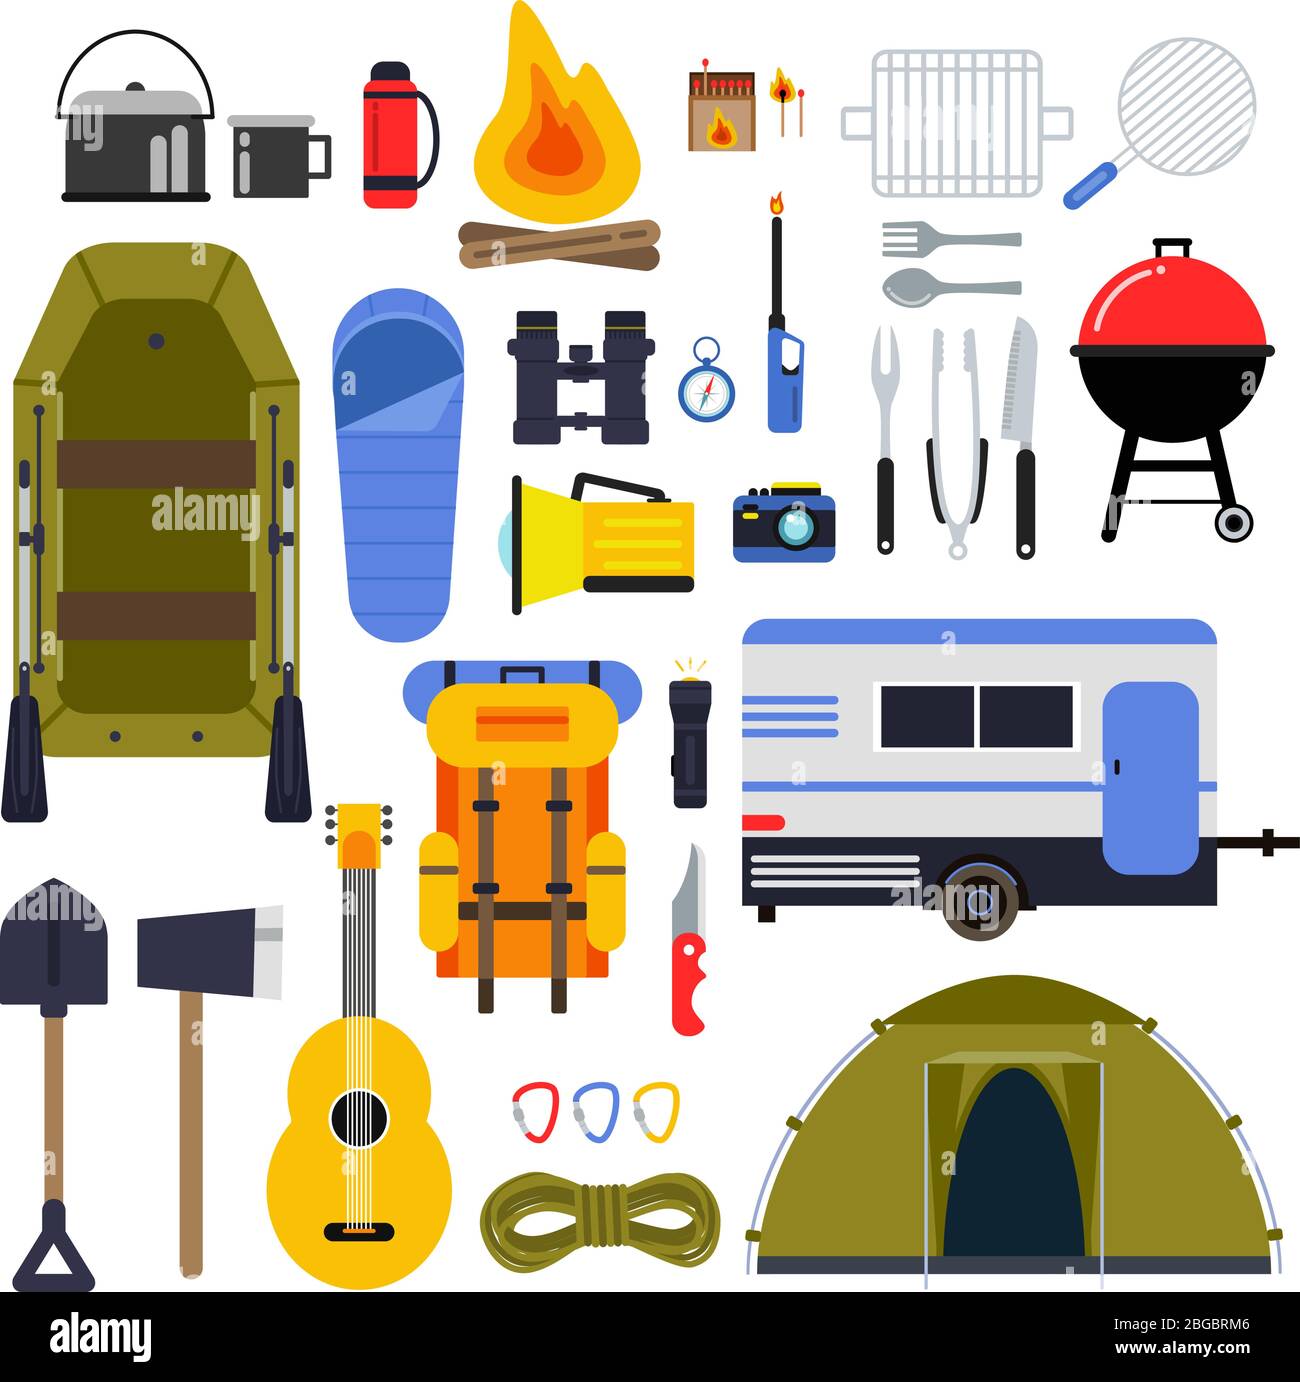 Camping equipment for travel. Hiking accessories vector icon set in flat style Stock Vector